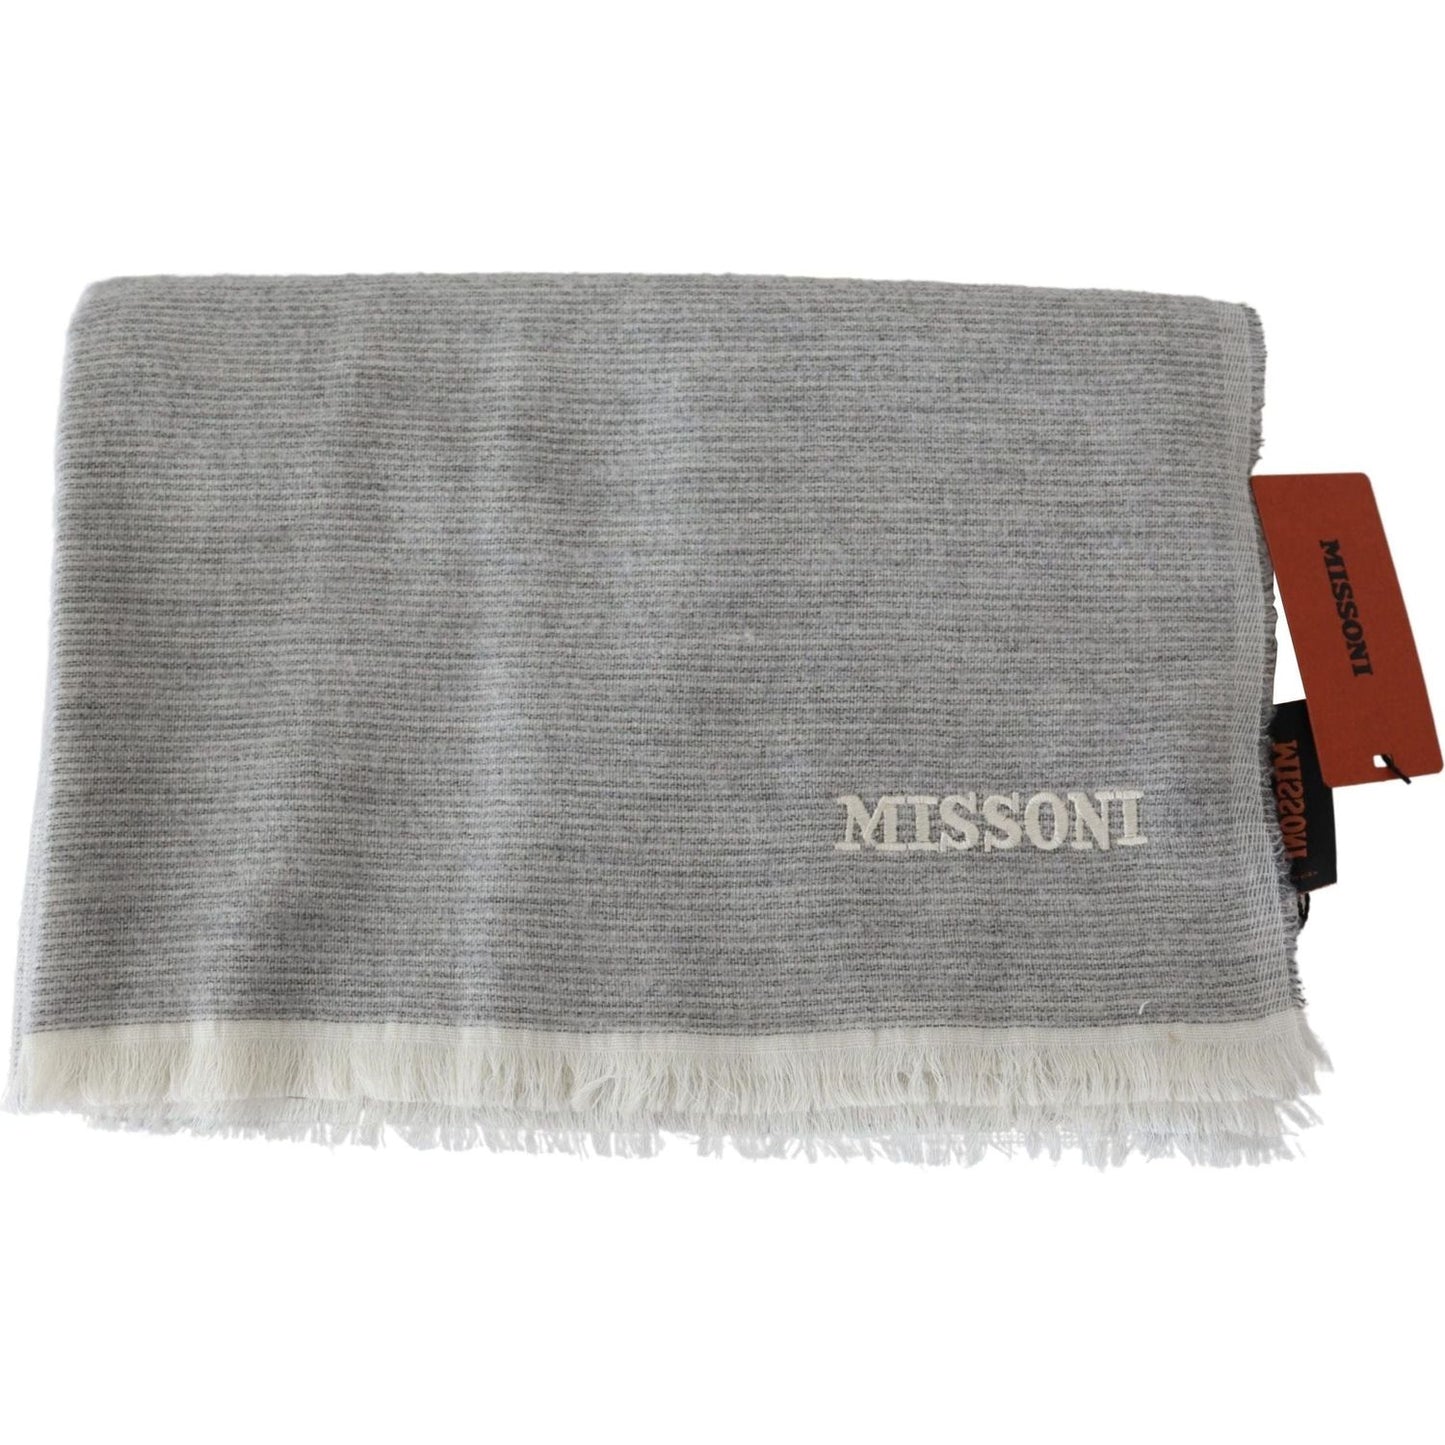 Missoni Elegant Beige Wool Scarf with Embroidery Detail beige-100-wool-unisex-neck-wrap-scarf IMG_0260-scaled-78e2cd45-e61.jpg